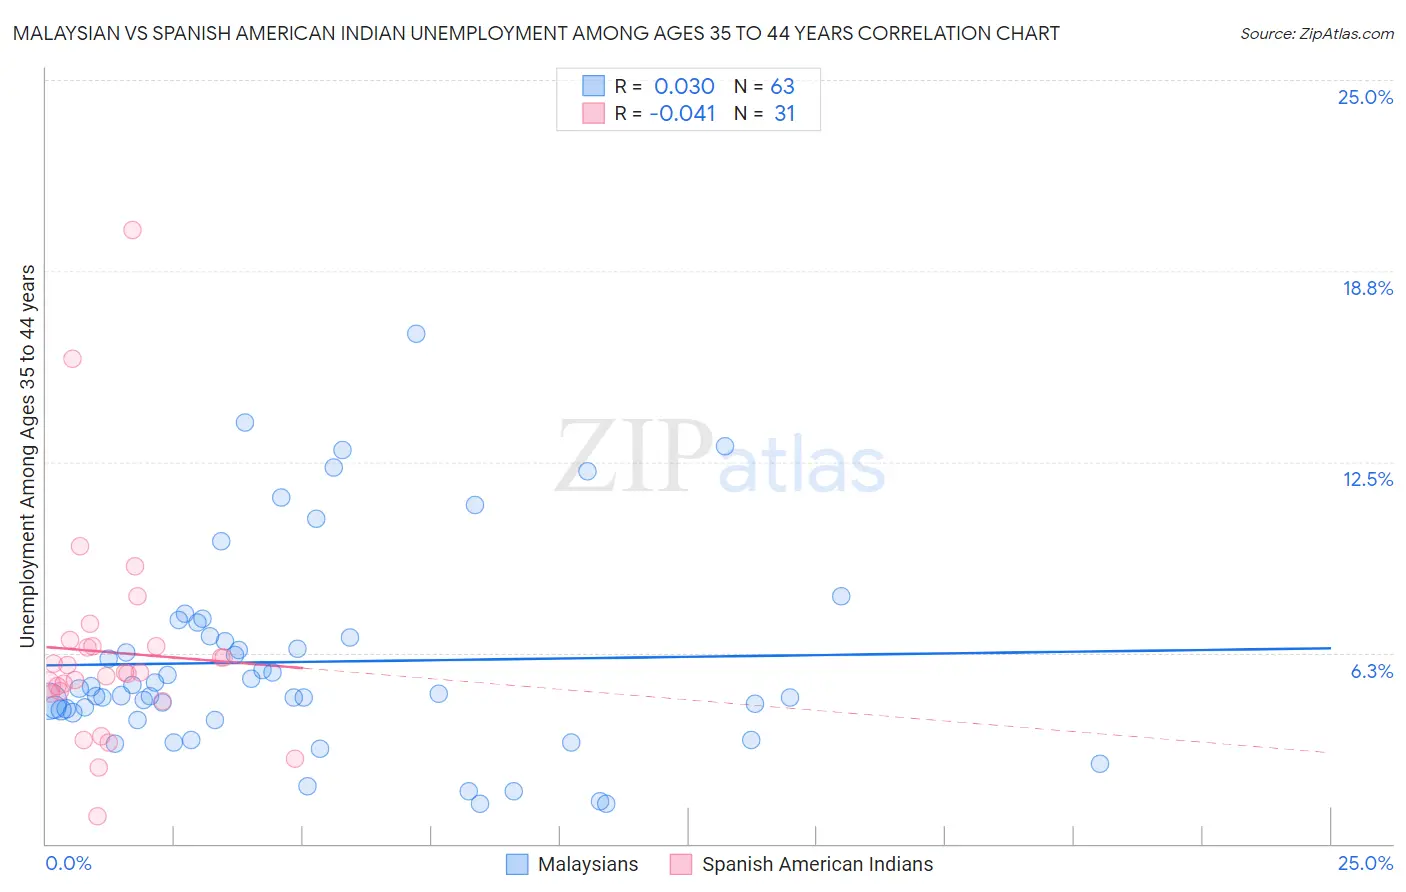 Malaysian vs Spanish American Indian Unemployment Among Ages 35 to 44 years